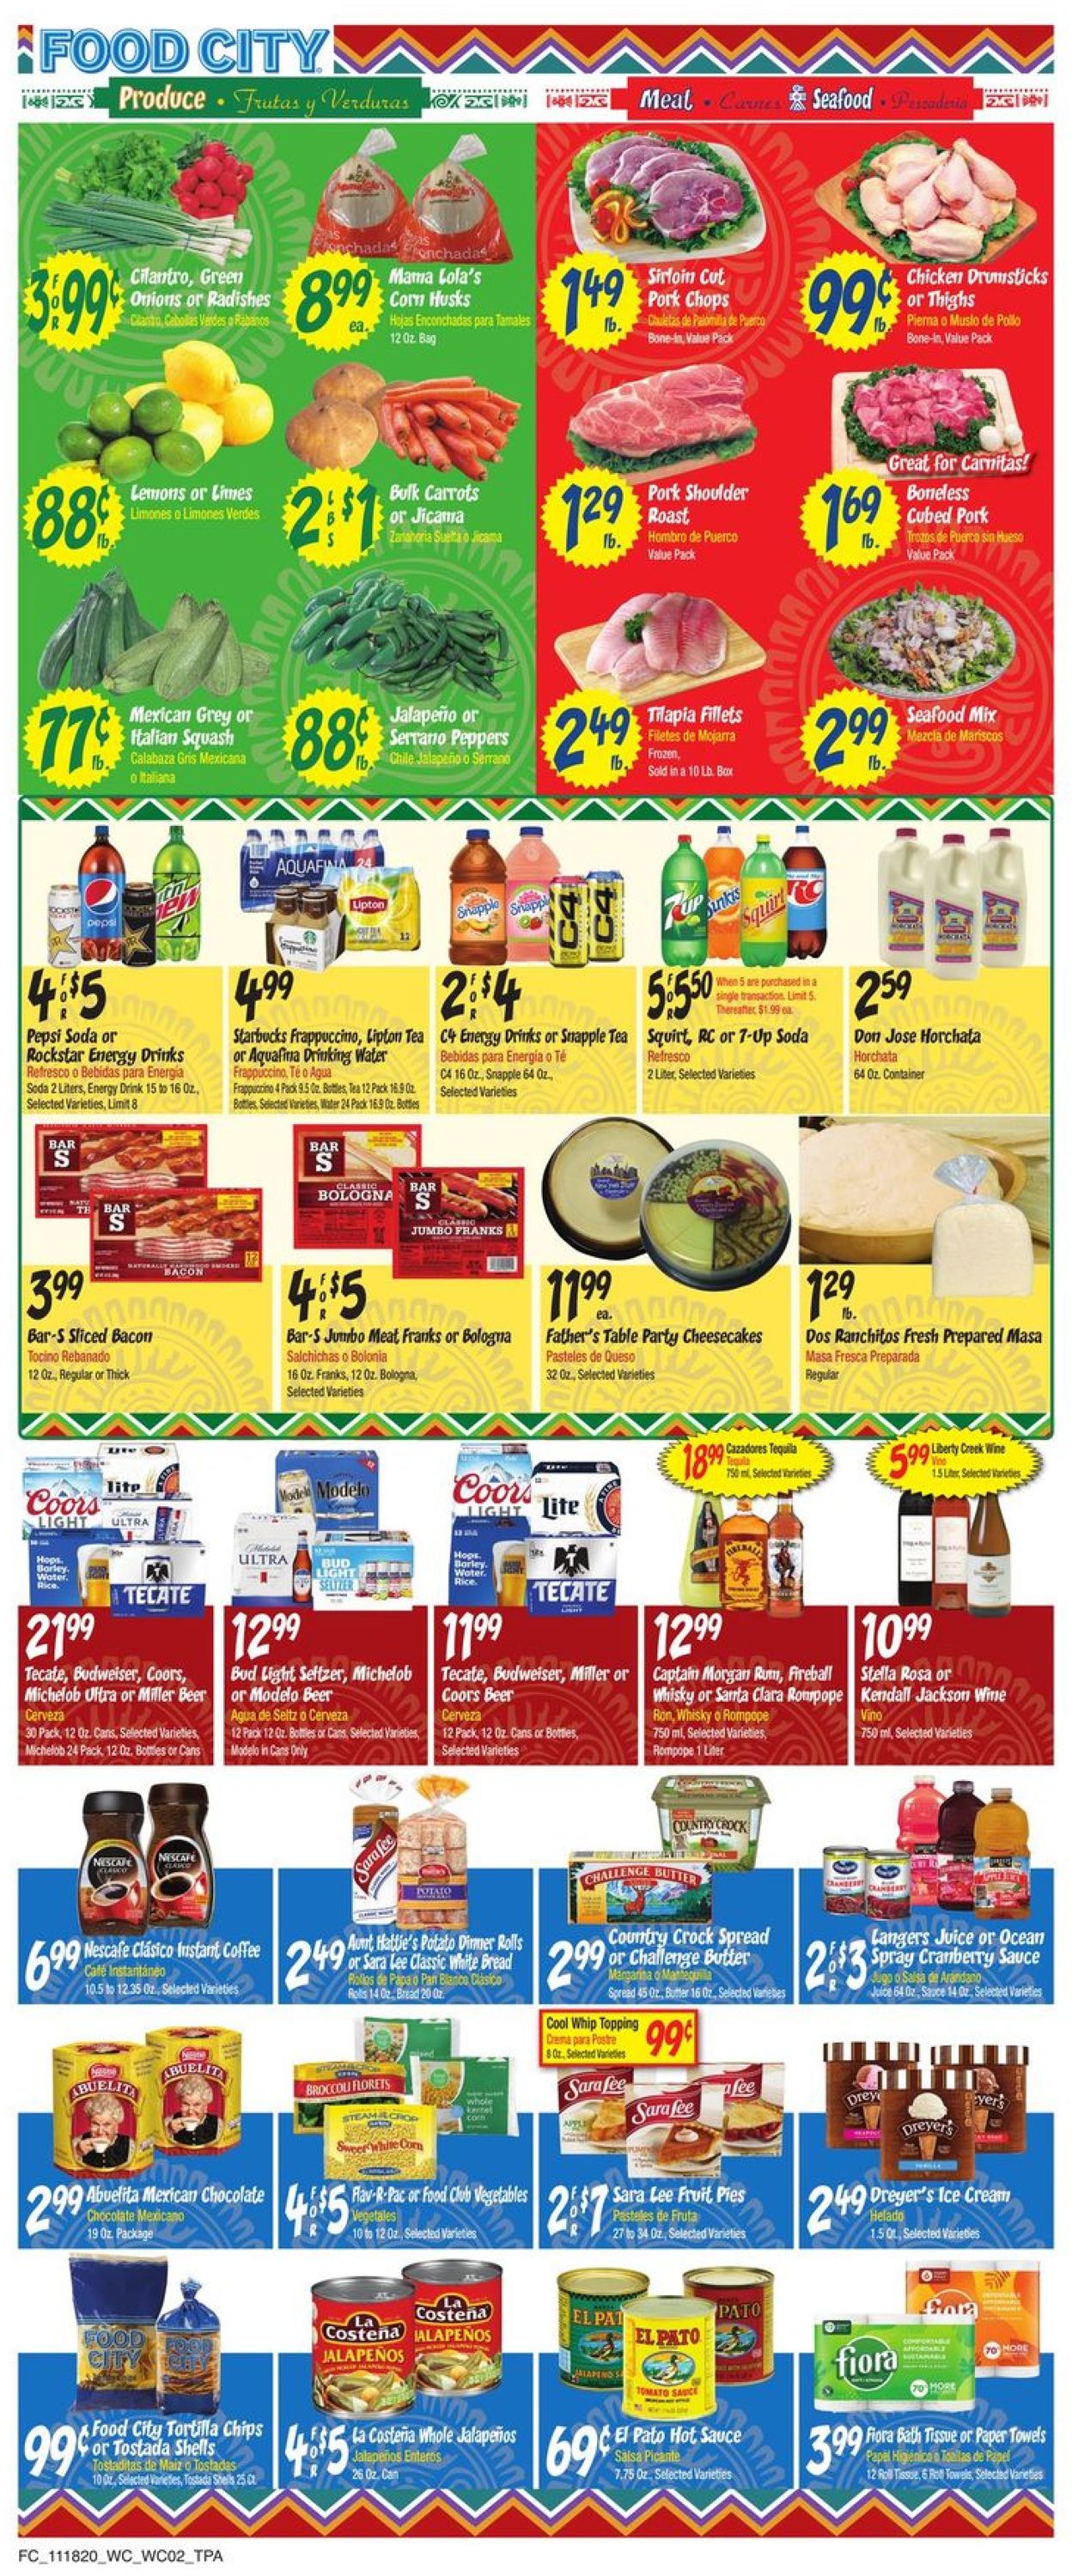 Catalogue Food City Thanksgiving ad 2020 from 11/18/2020